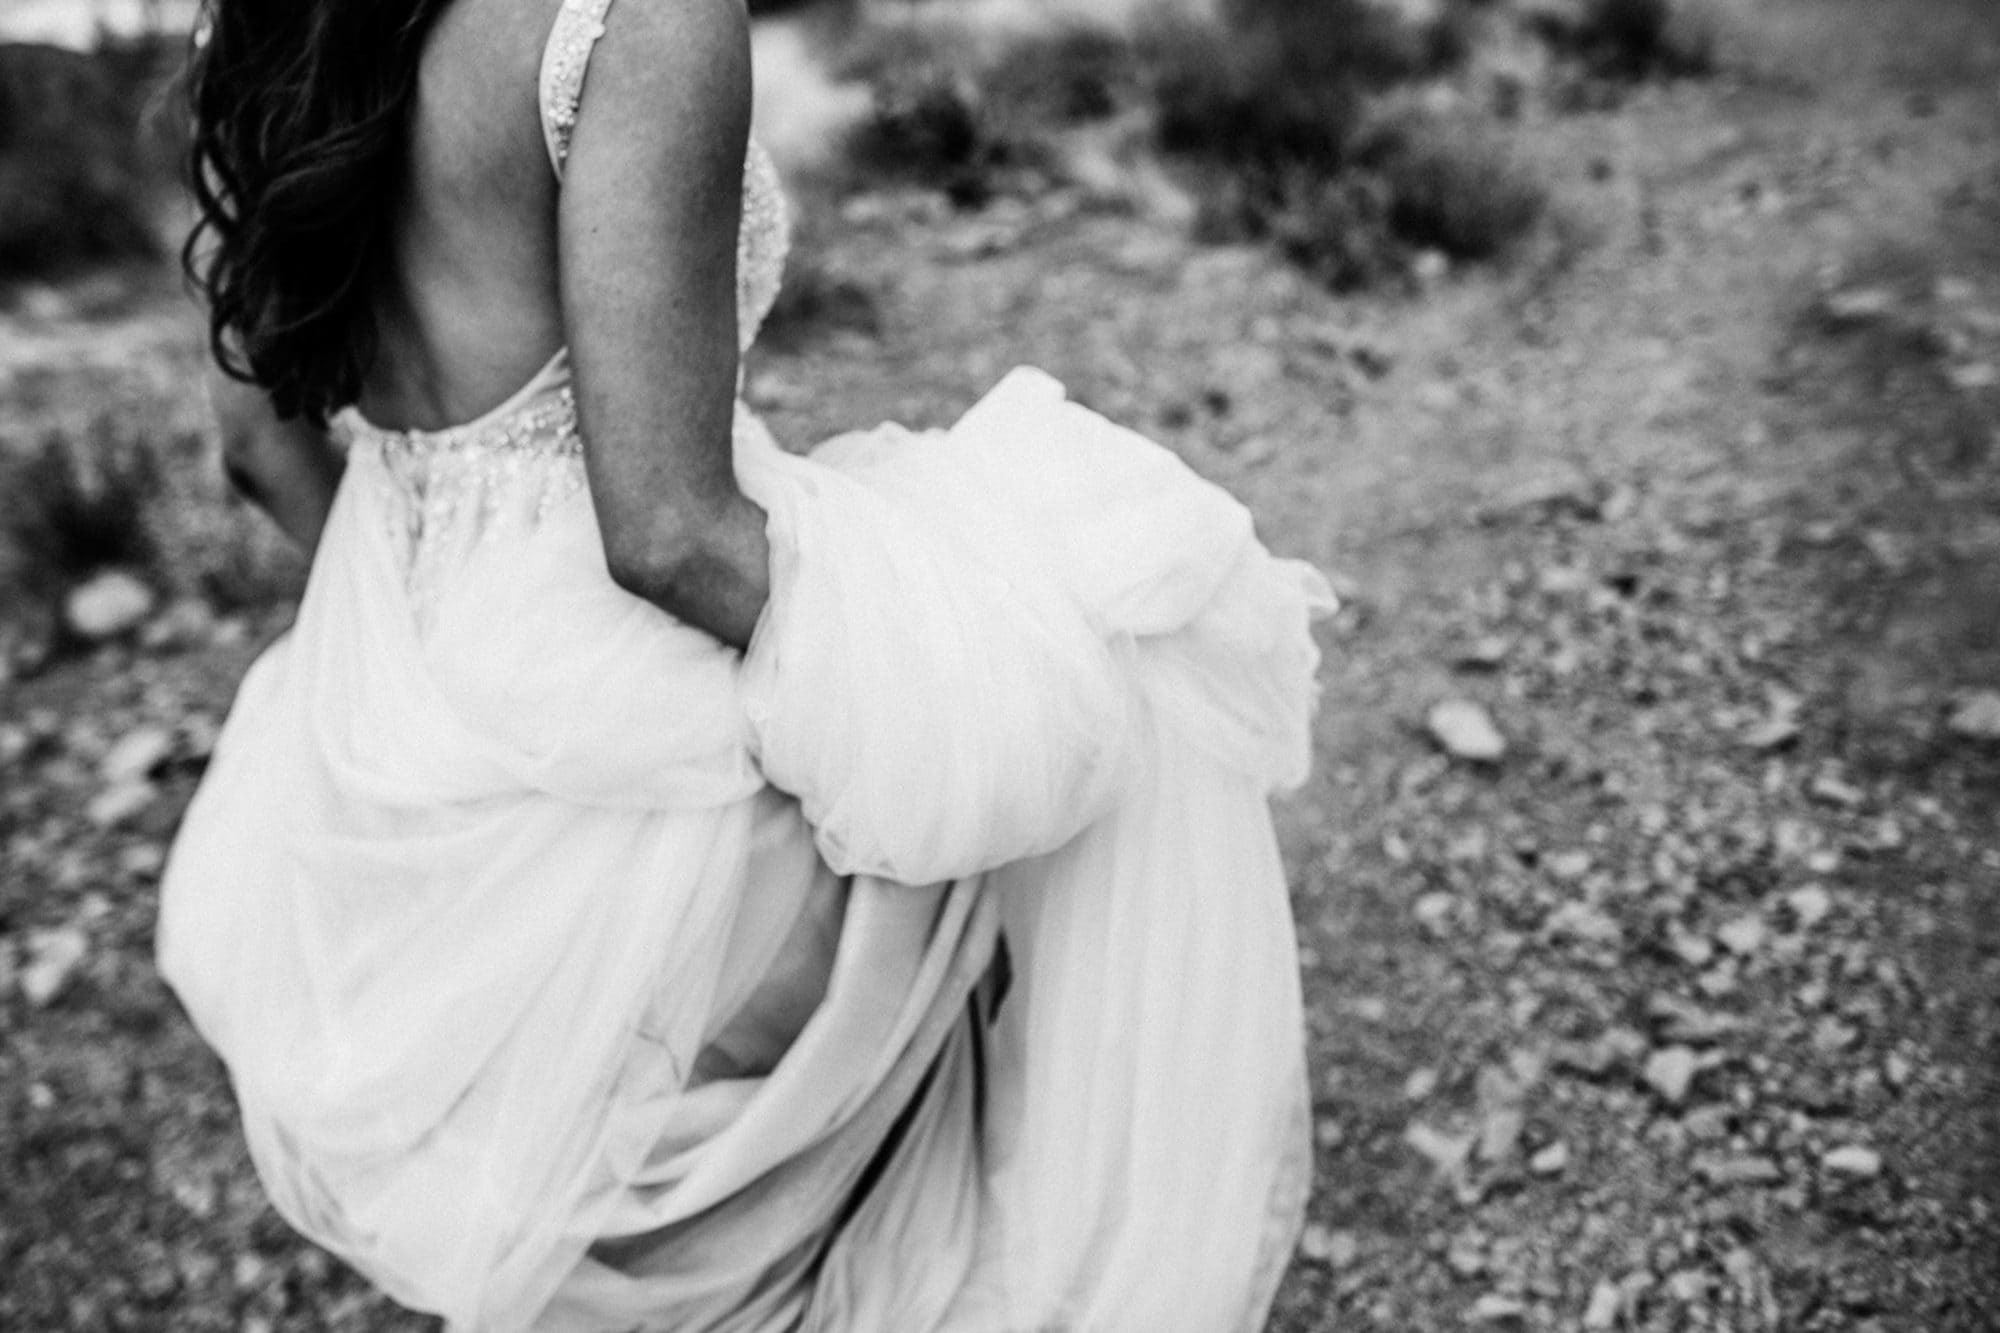 This Lost Dutchman State Park Wedding showcases exactly the desert is the best. A day  full of family, love, and a stunning sunset- it's not to be missed. 